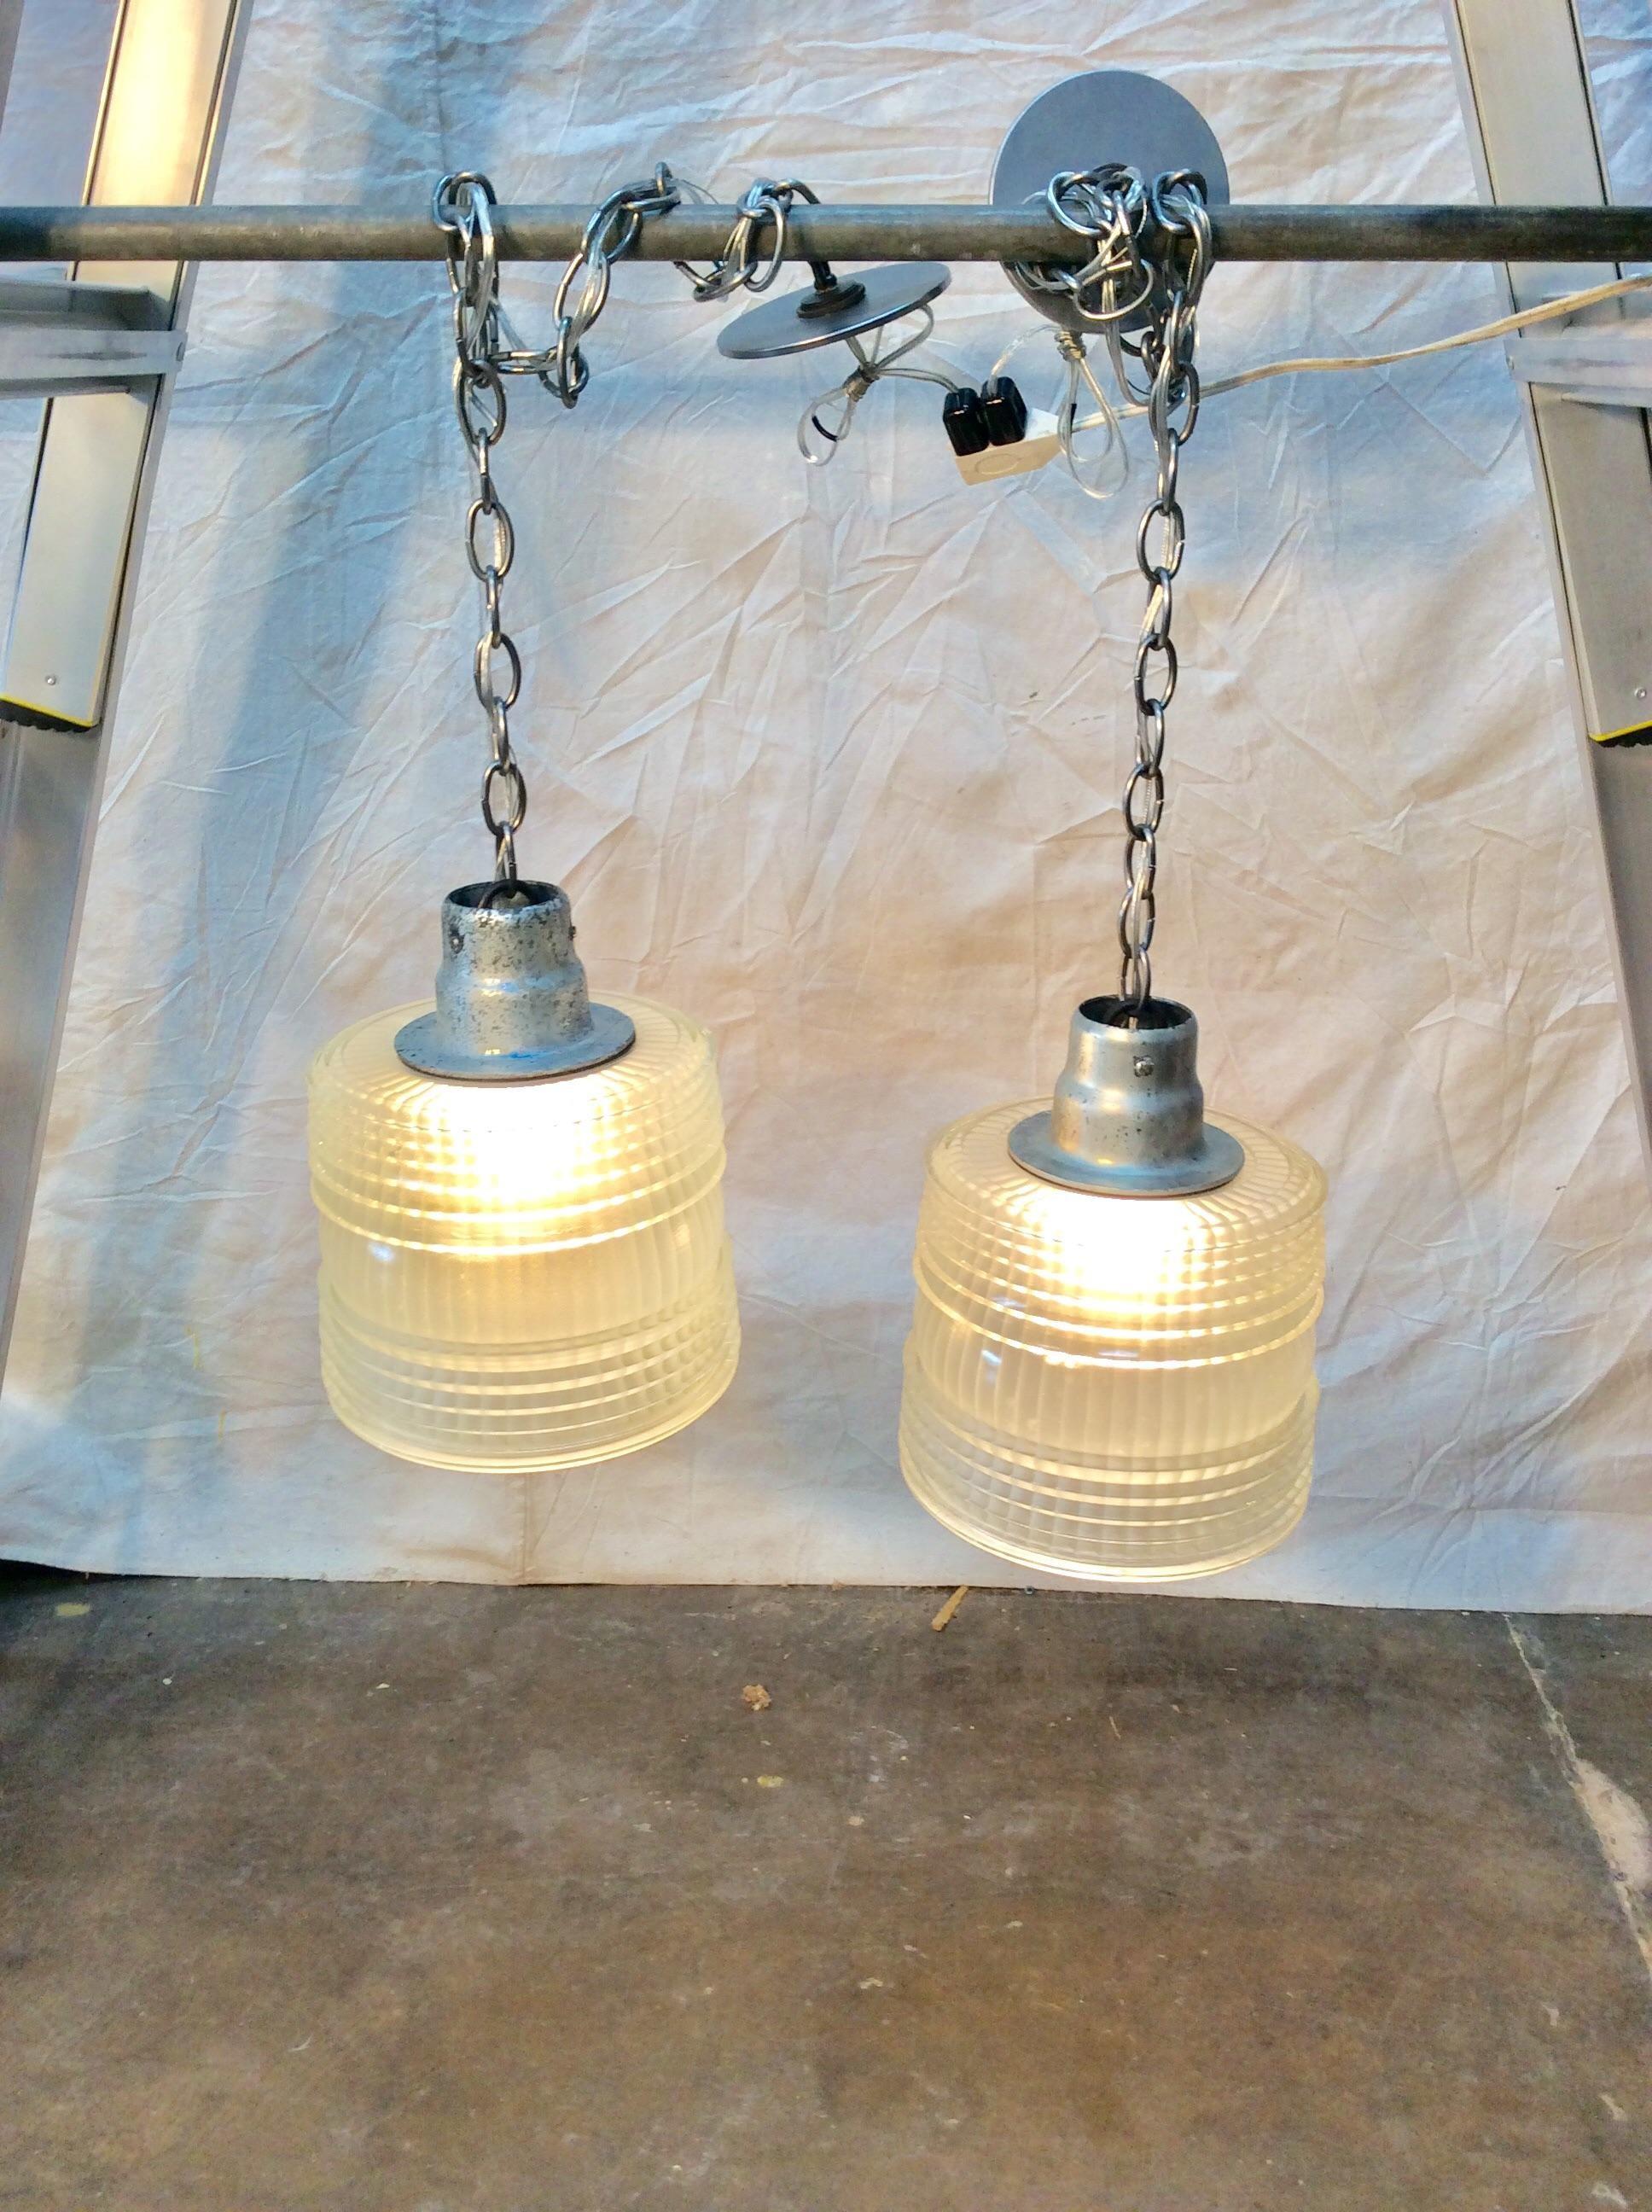 With a simple clean design these French holophane pendant lights are perfect for a kitchen or hallway. The prismatic shade and cast metal hardware is marked 3337-4, Made in France. Newly wired to United States standards the pendants are modern and